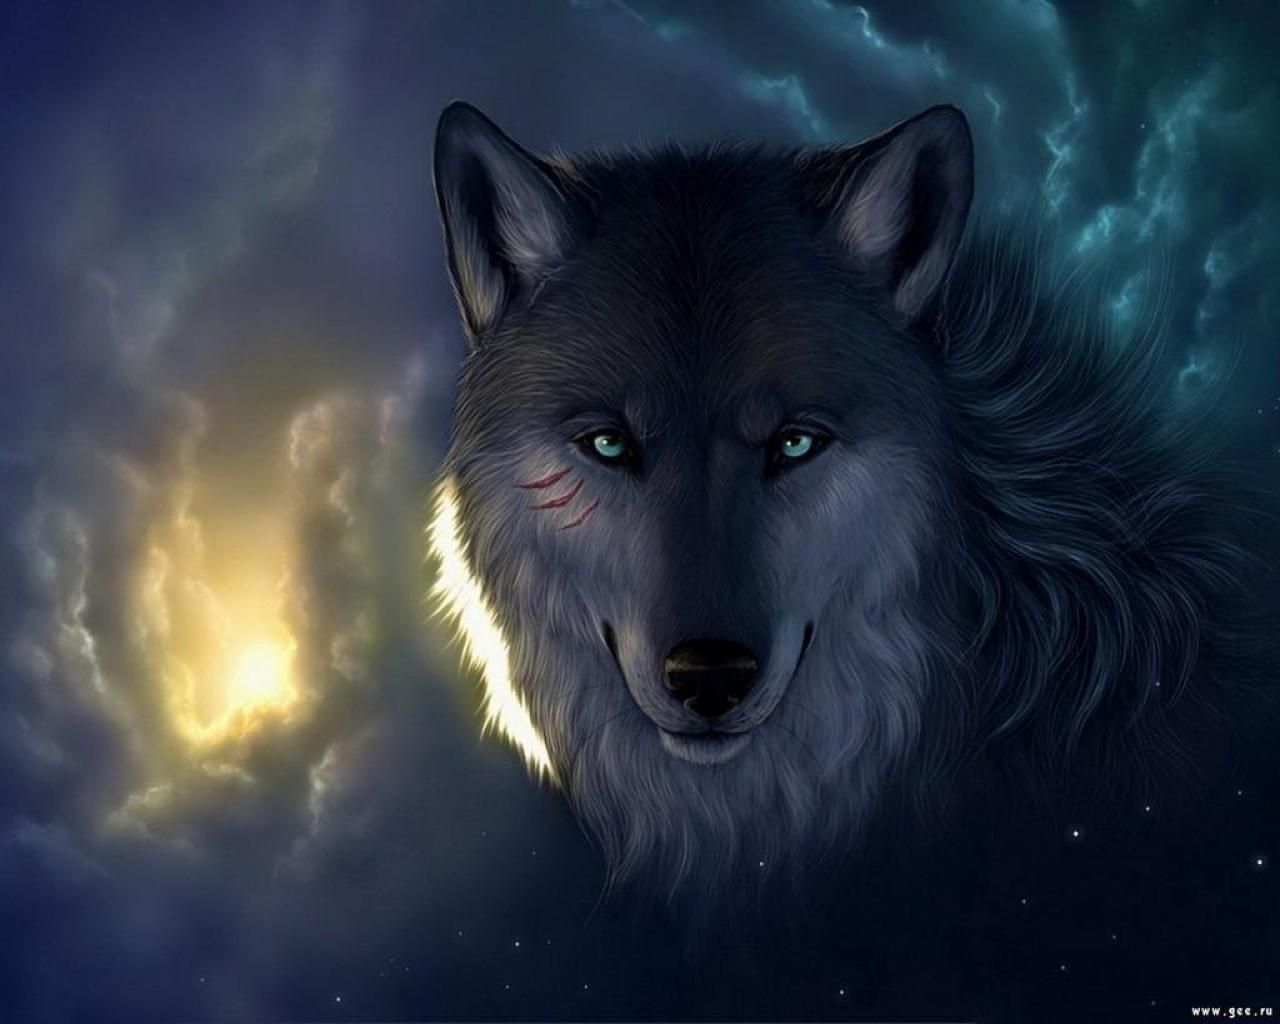 Wolf in the Wild Wallpapers, Wolf in the Wild Backgrounds, Wolf in